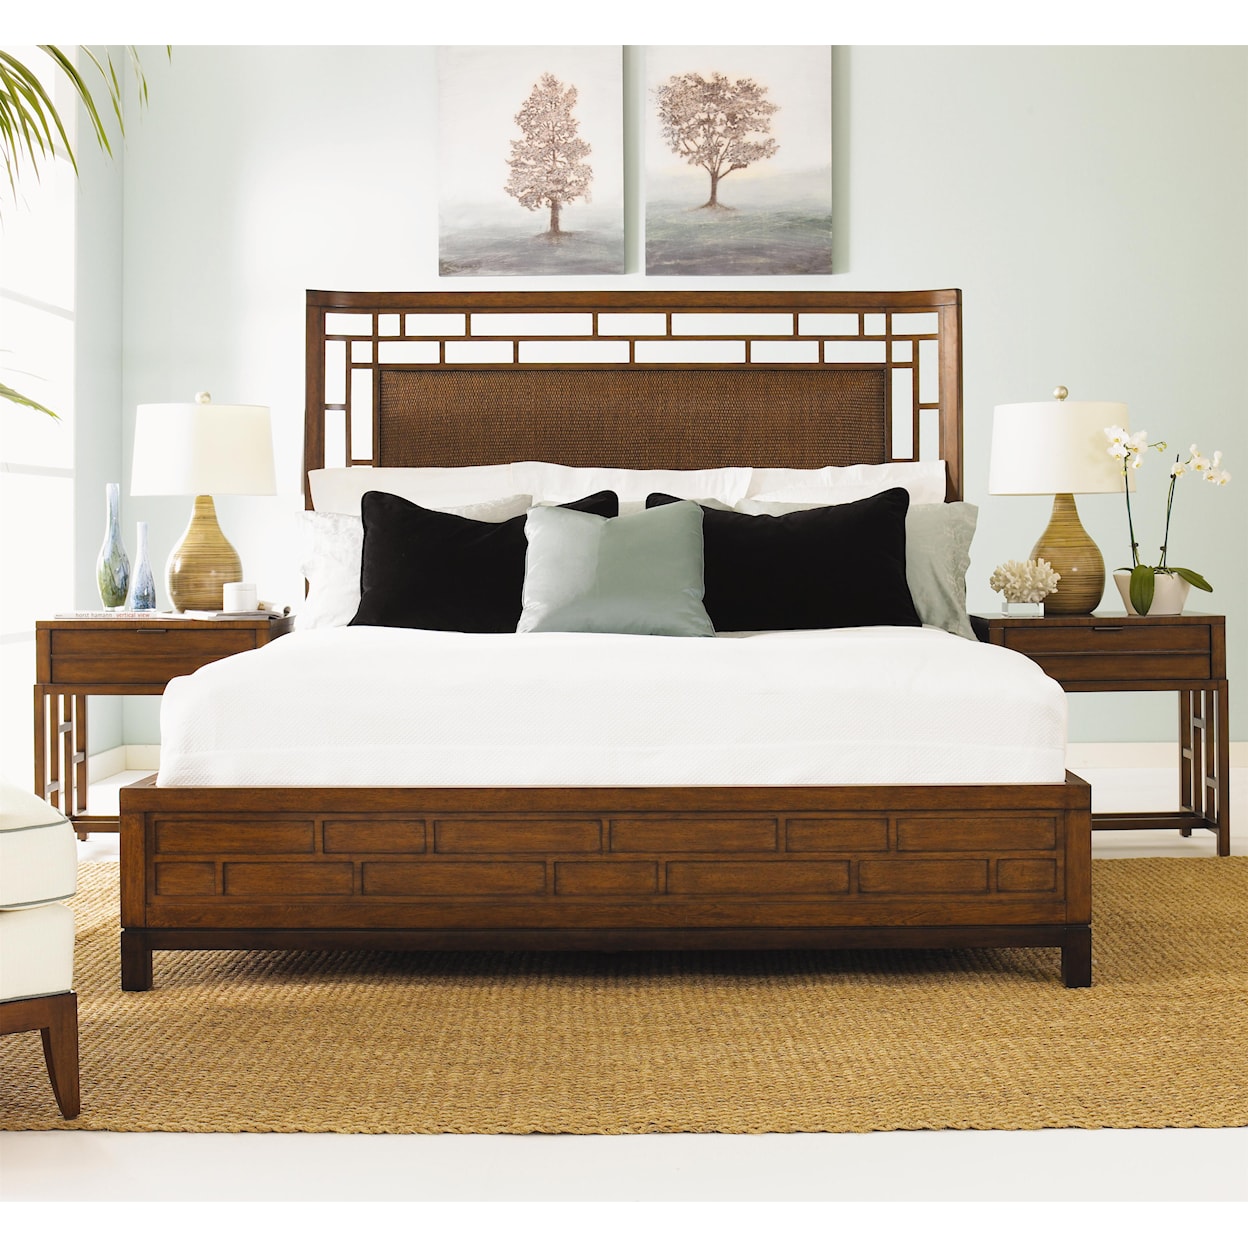 Tommy Bahama Home Ocean Club California King Paradise Point Bed